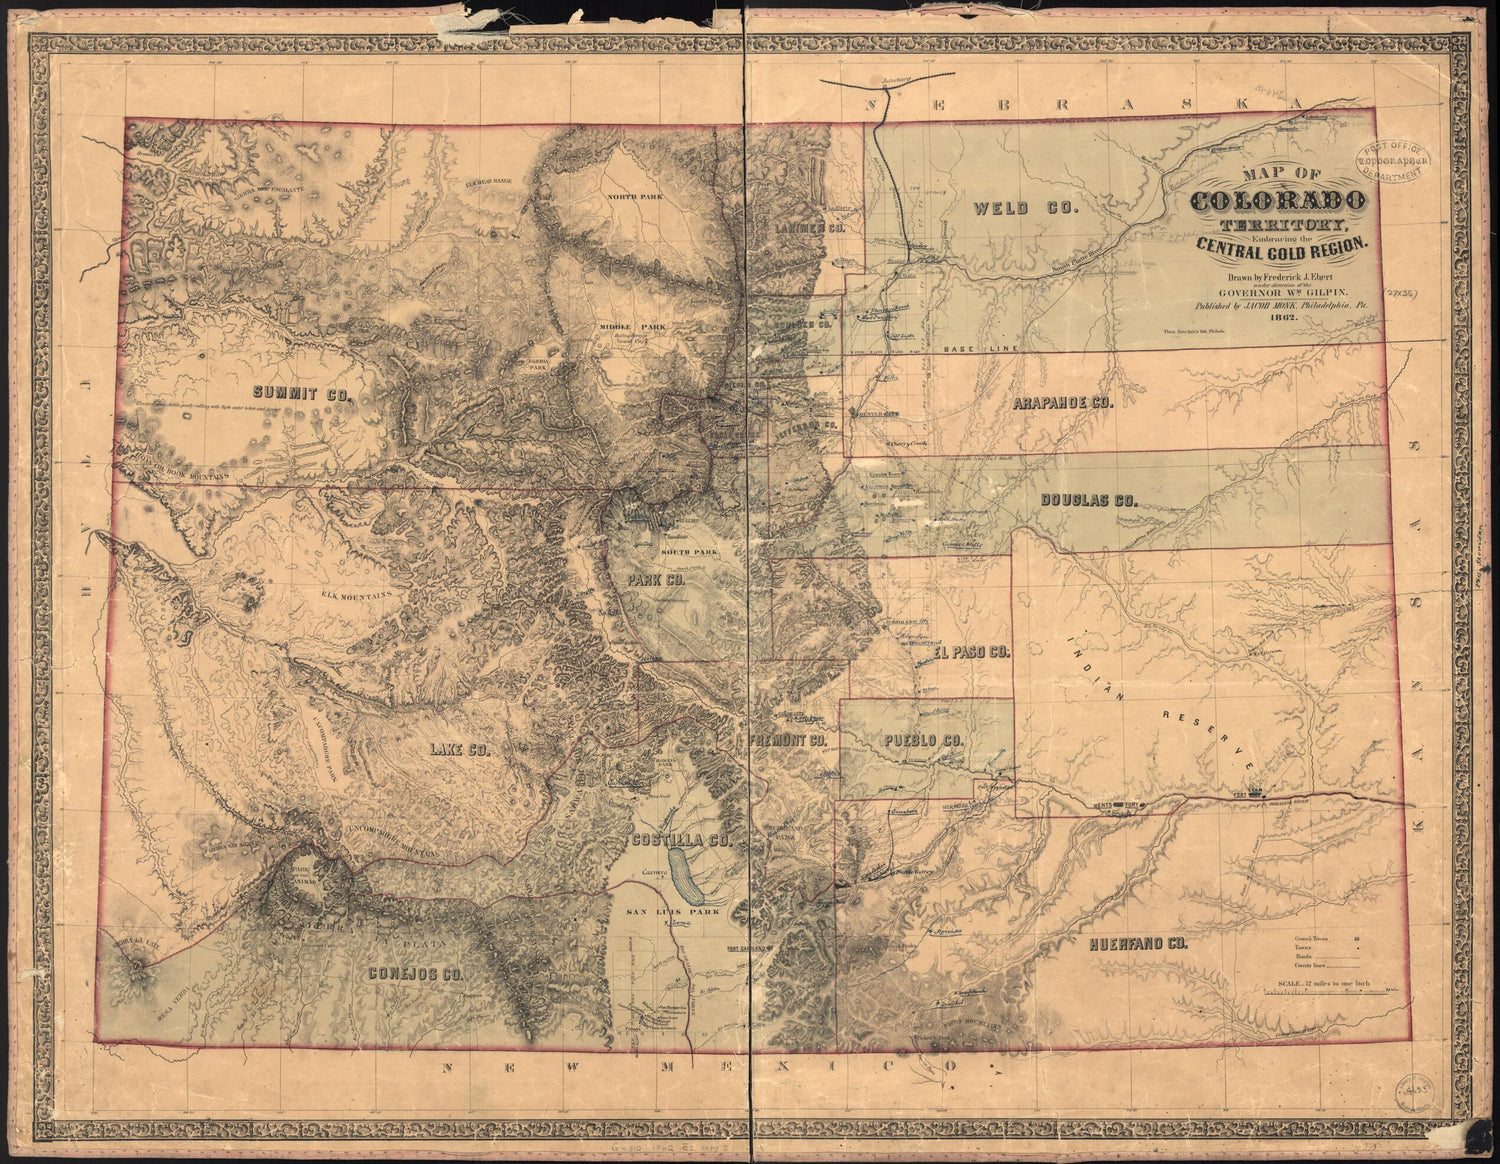 This old map of Map of Colorado Territory Embracing the Central Gold Region from 1862 was created by Frederick J. Ebert, William Gilpin, Jacob Monk,  T. Sinclair&